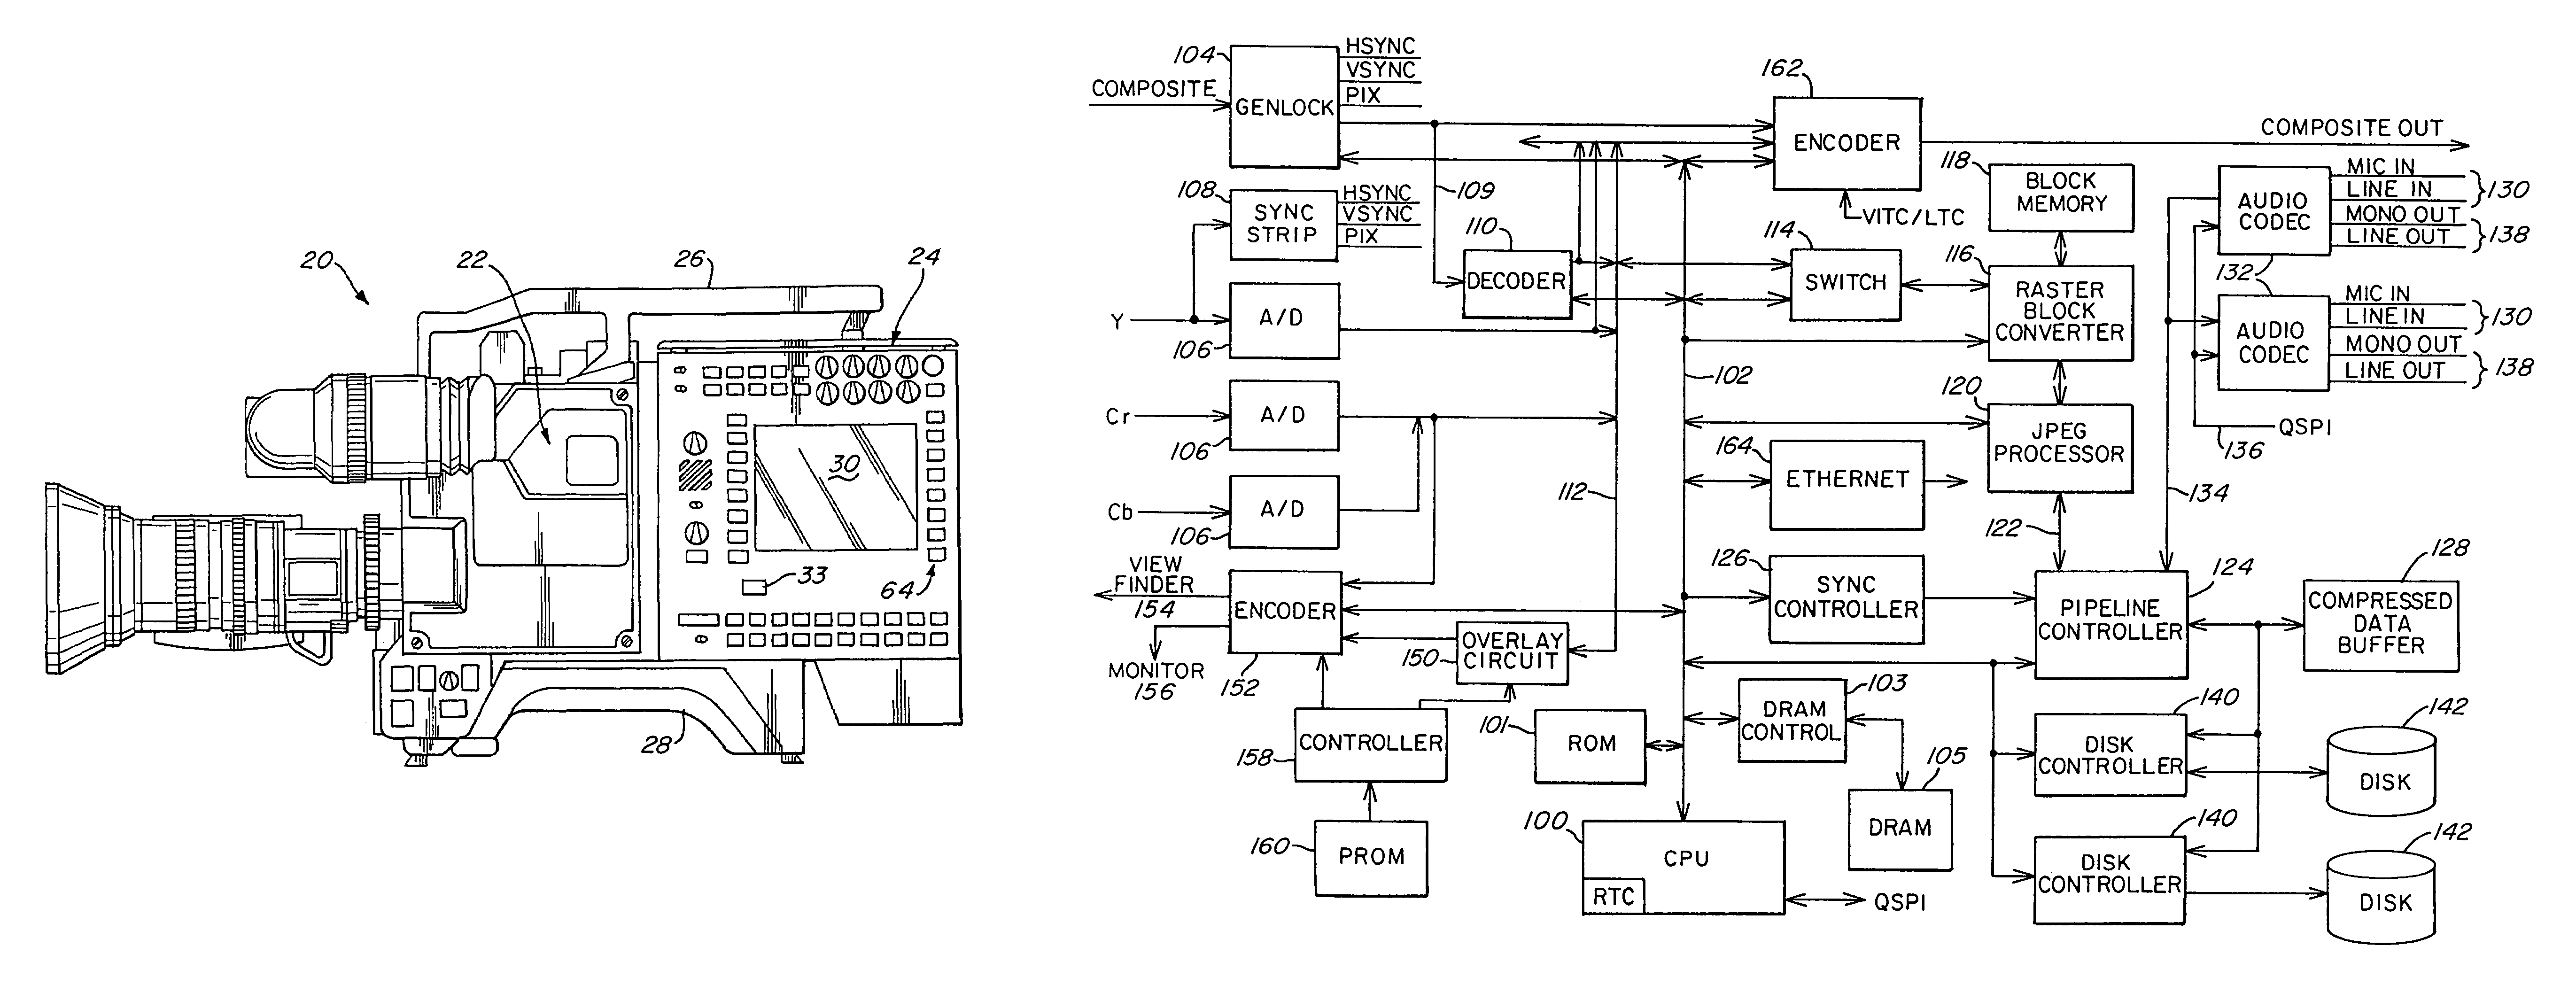 Motion picture recording device using digital, computer-readable non-linear media